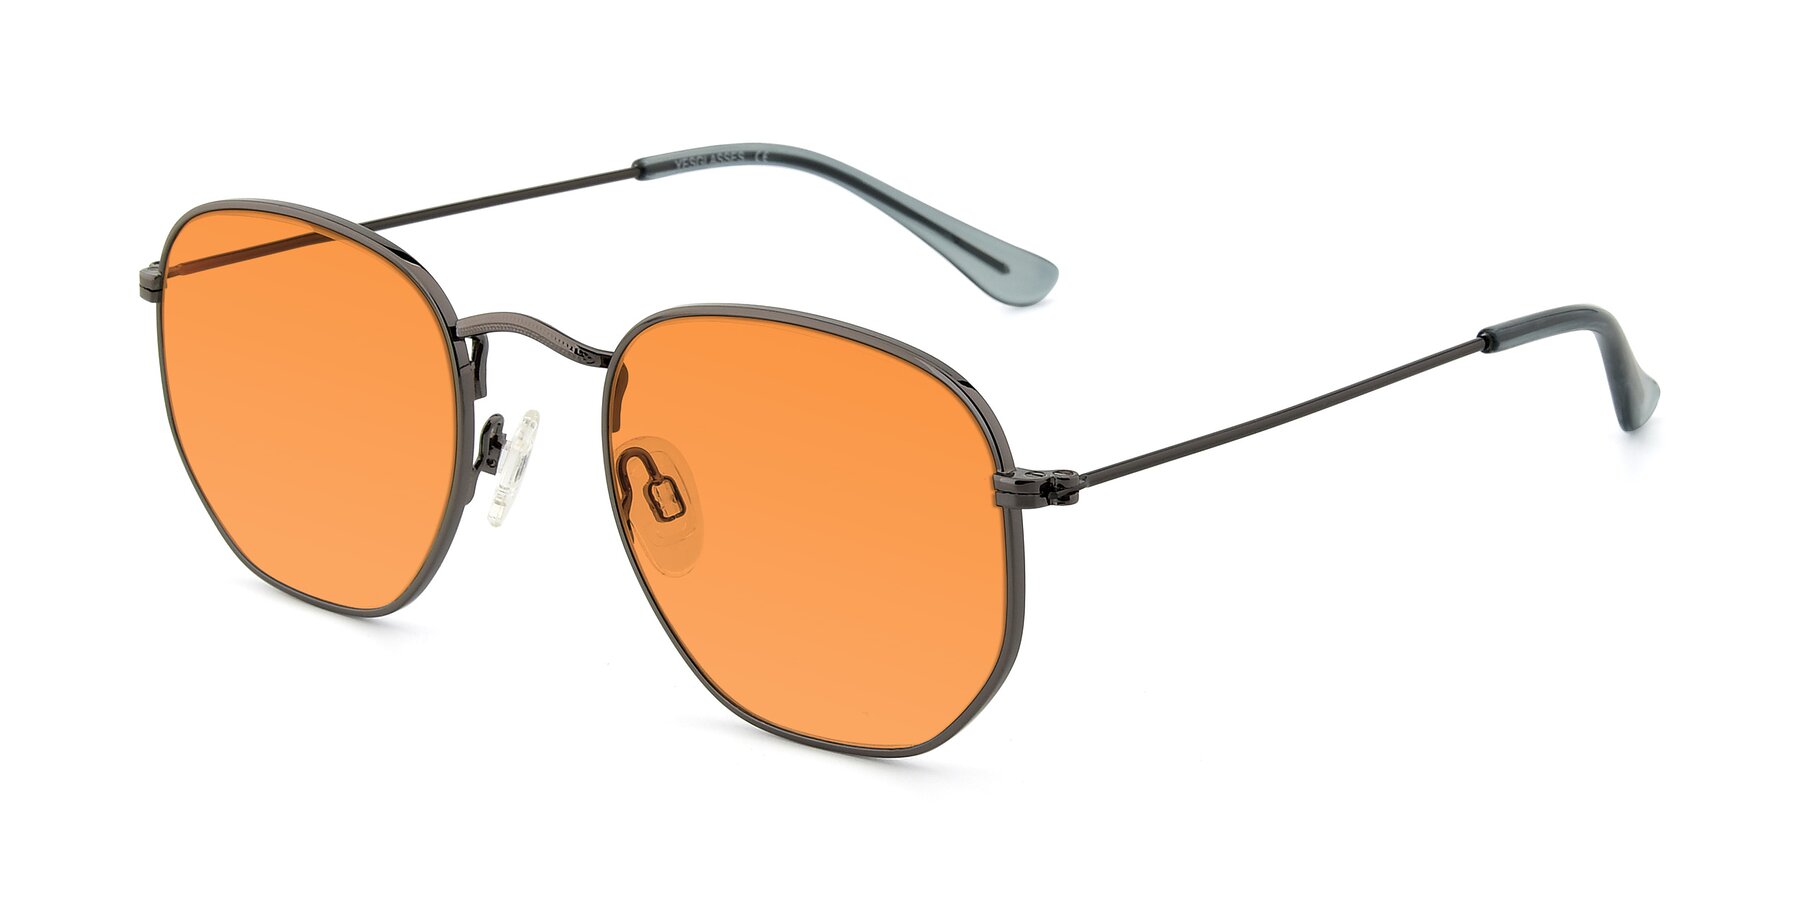 Angle of SSR1944 in Grey with Orange Tinted Lenses